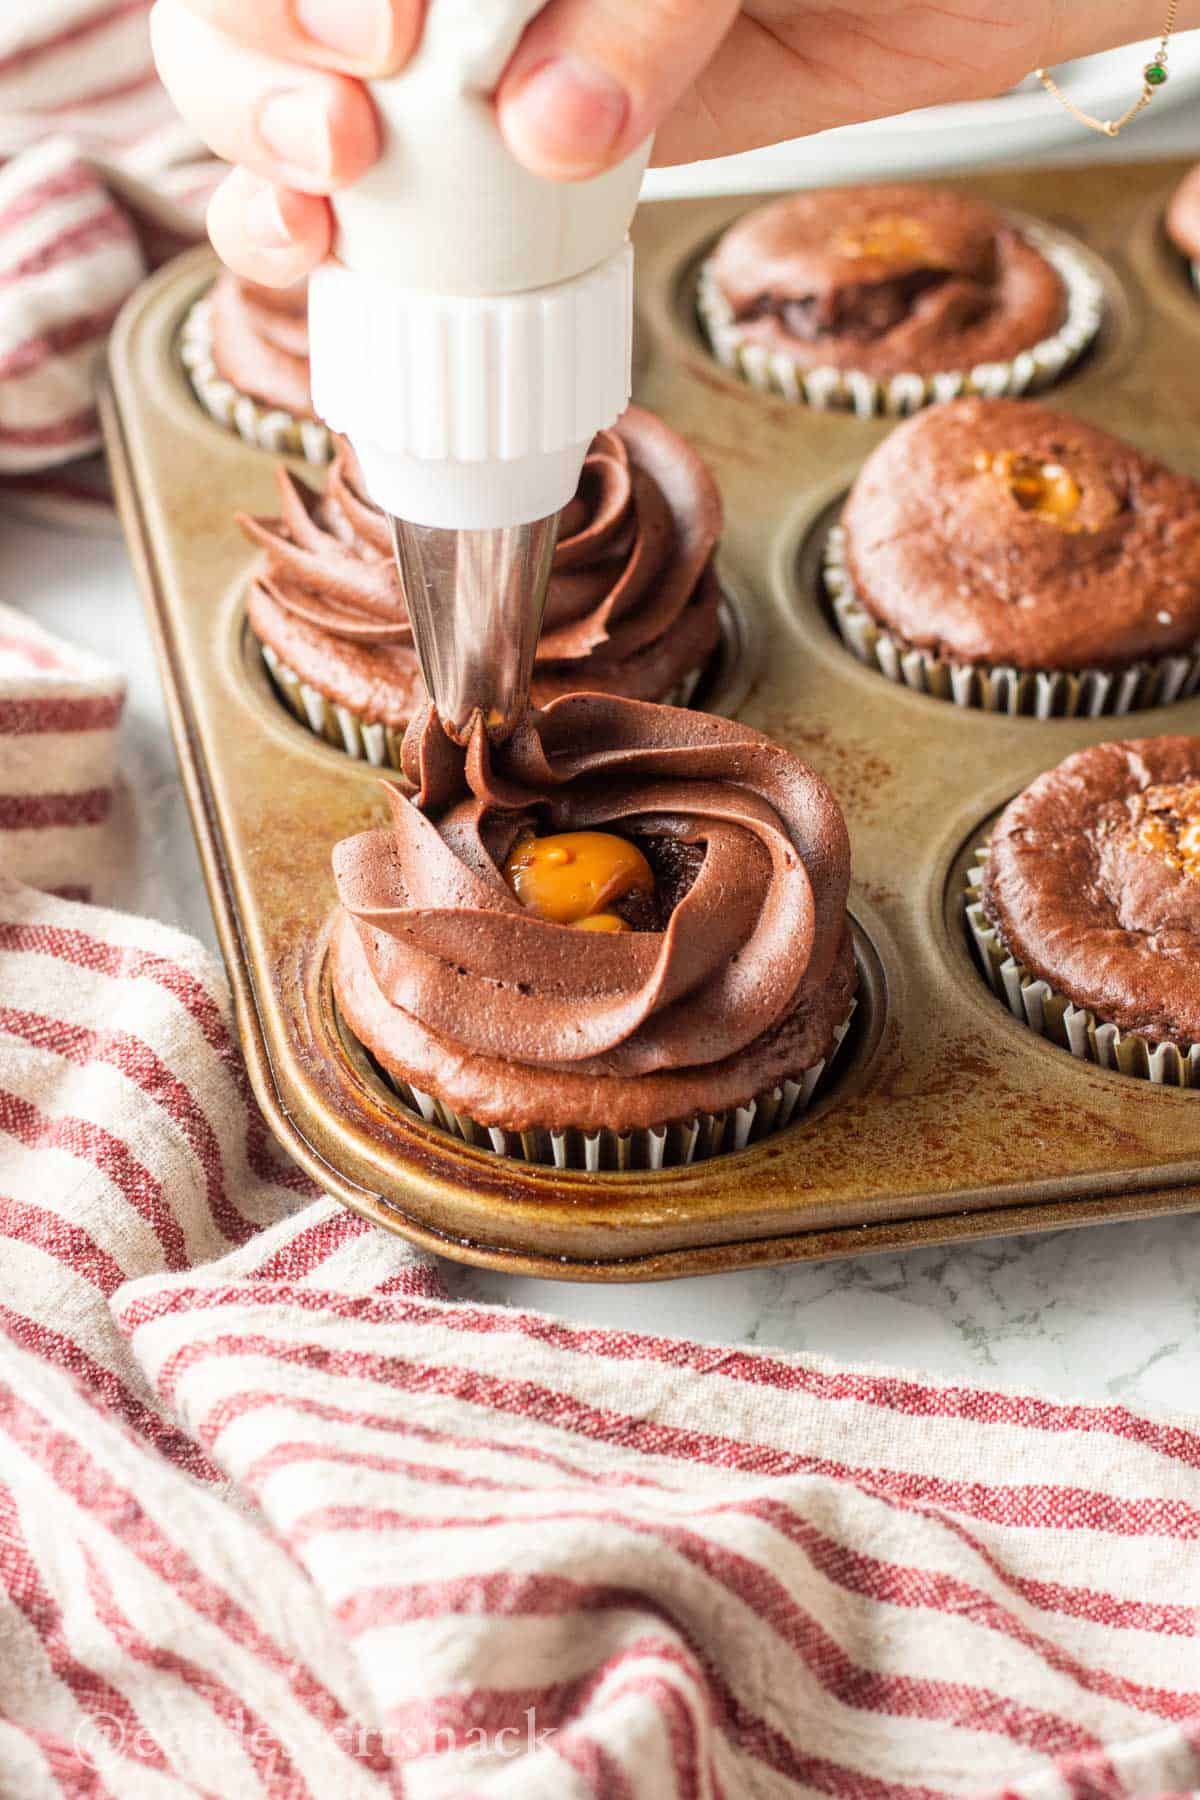 Hand piping chocolate frosting onto caramel filled chocolate cupcakes.